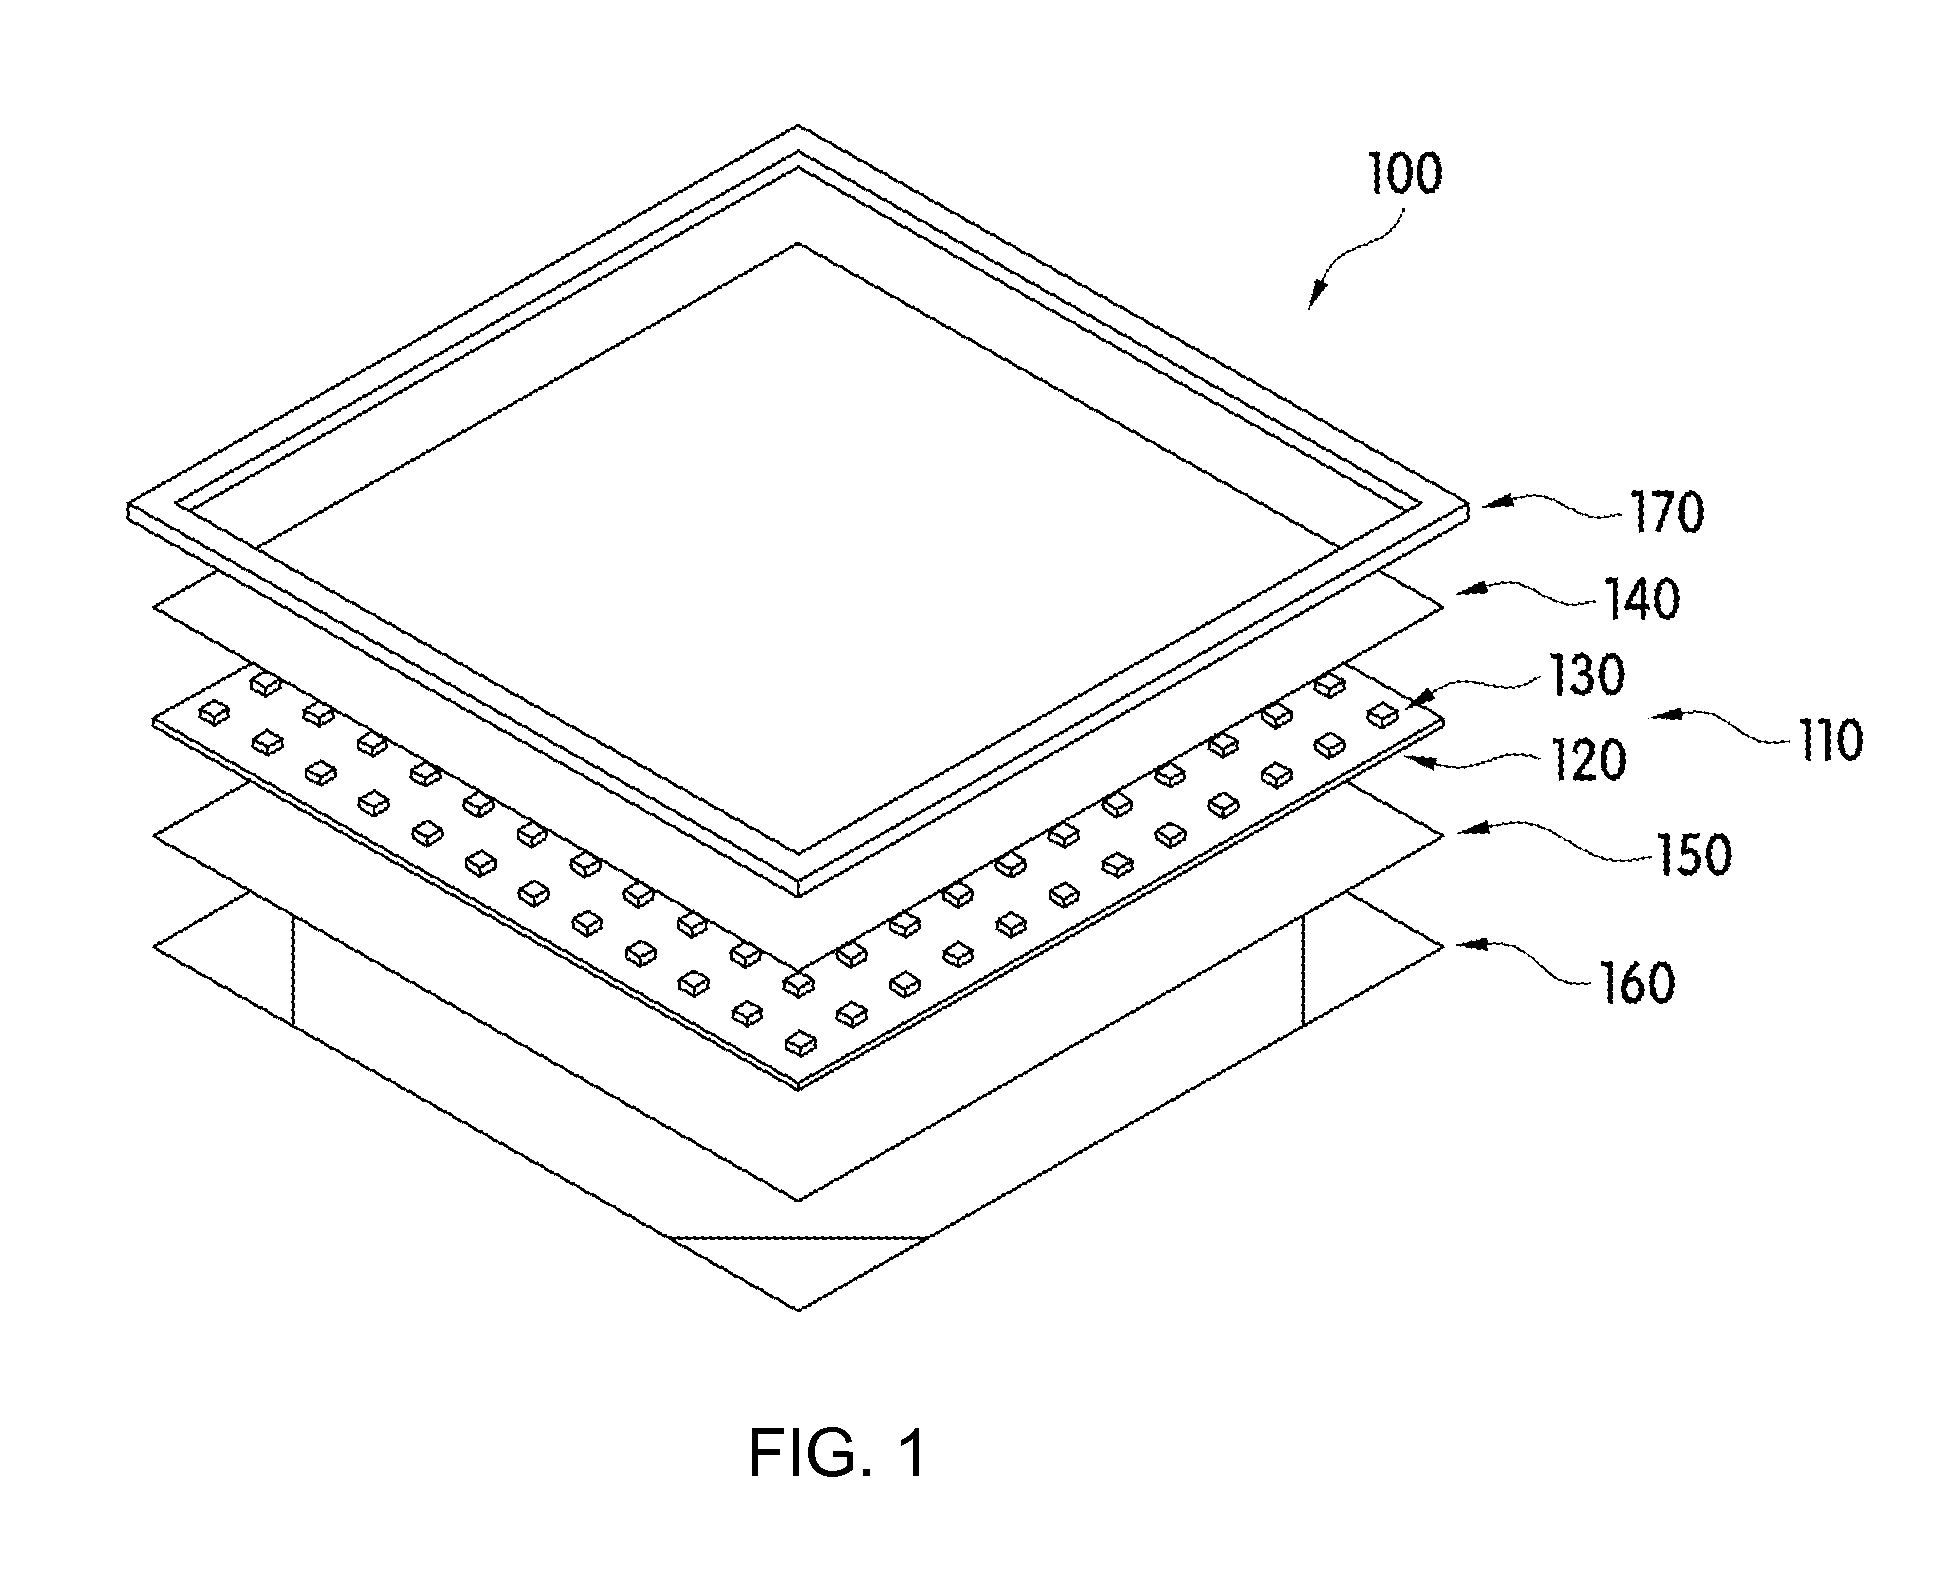 Flexible LED light source panel, and flexible LED lighting device for taking image by using the same panel